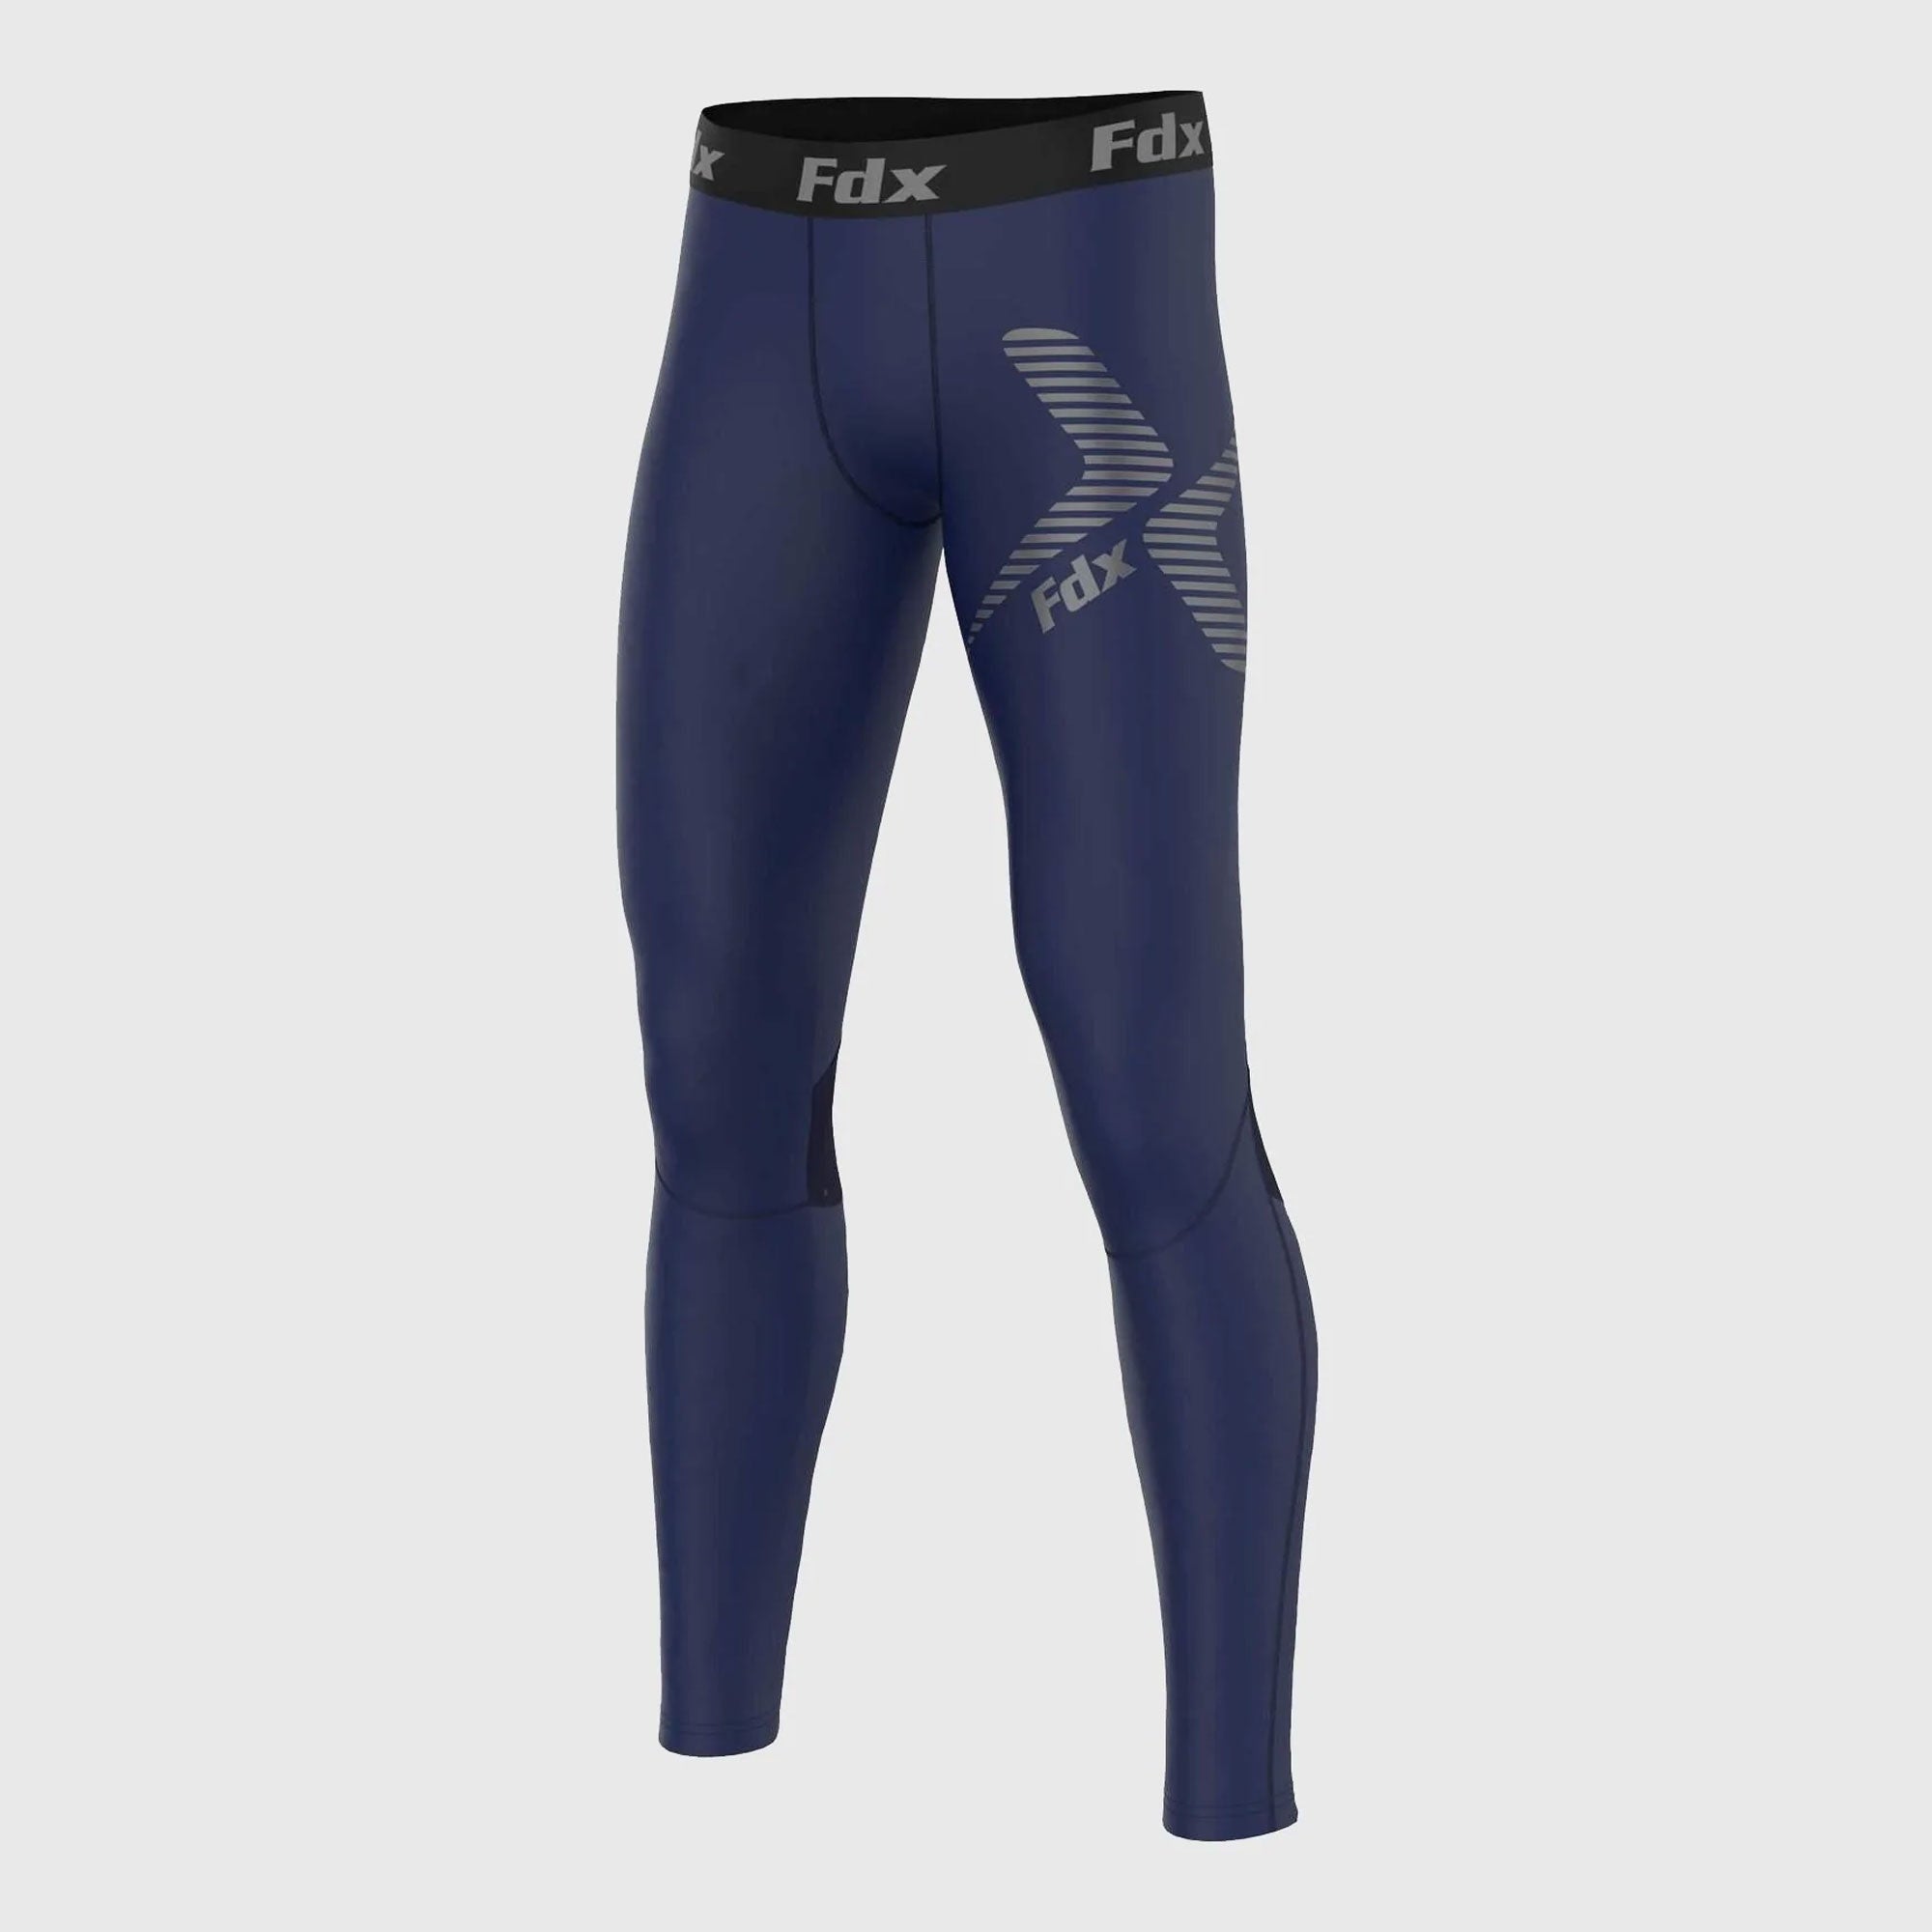 Compression Pants | Spandex Base Layer Tights | Sun Protection Leggings